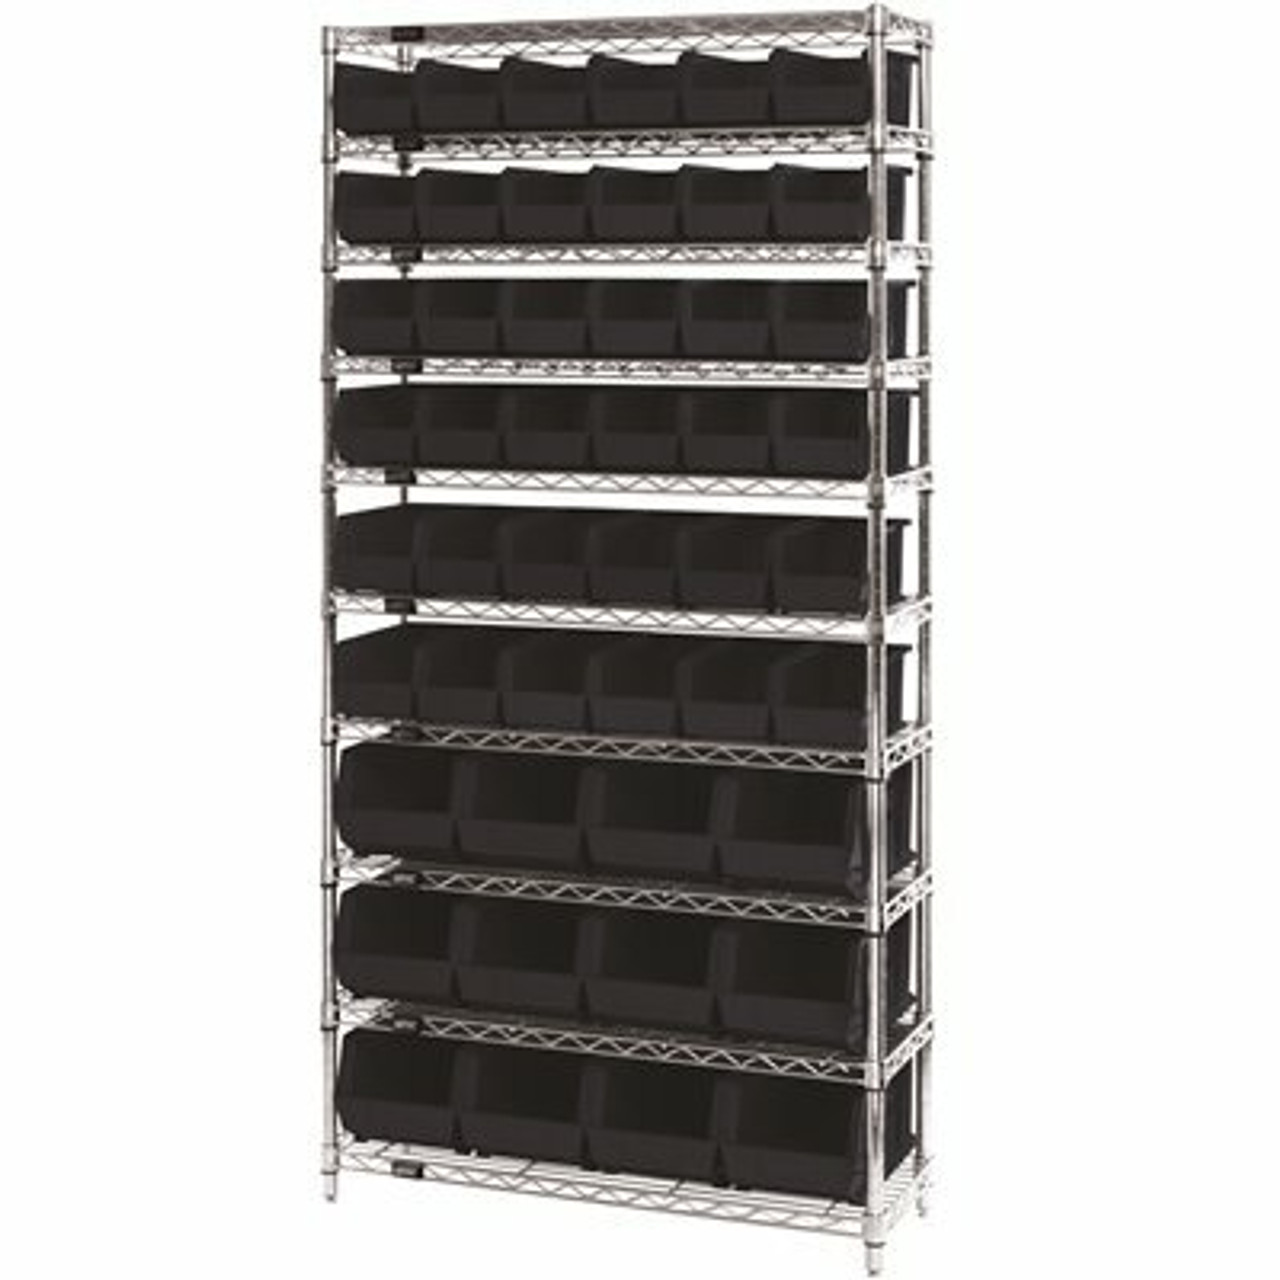 Quantum Storage Systems Giant Open Hopper 36 In. X 14 In. X 74 In. Wire Chrome Heavy Duty 10-Tier Industrial Shelving Unit - 308241544